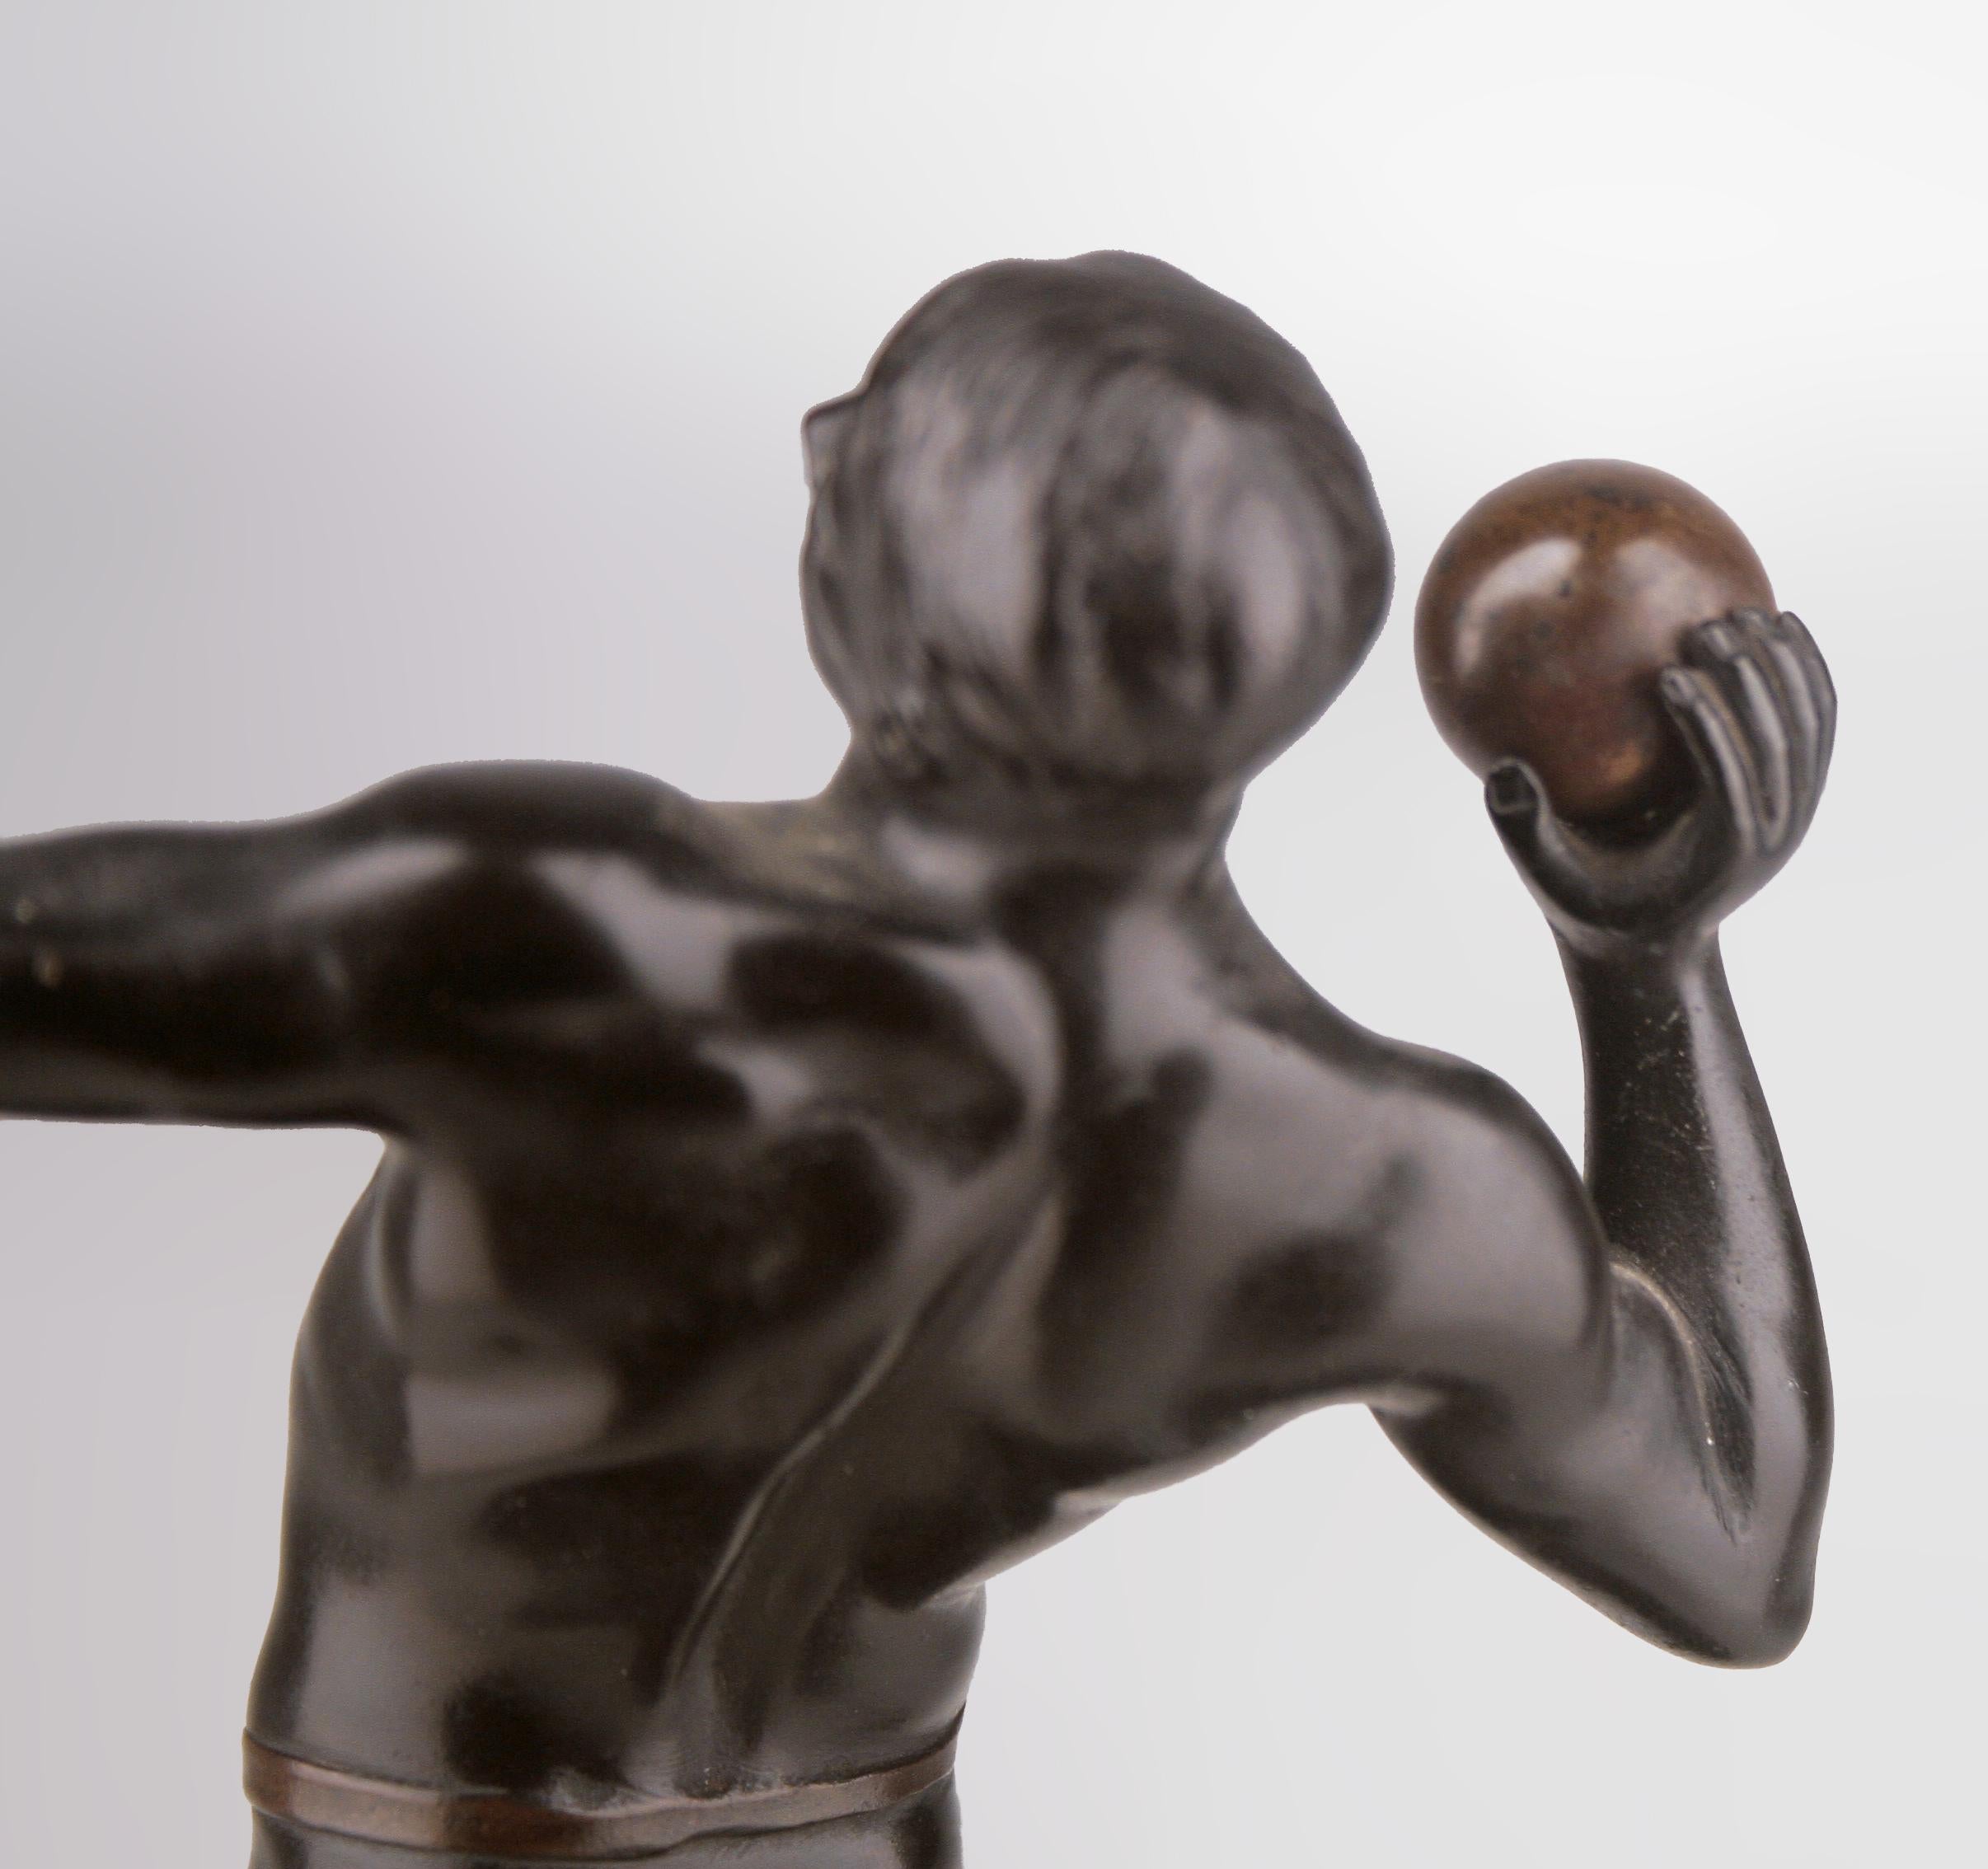 Jugendstil German Bronze Sculpture of Athlete Throwing a Ball by Schmidt-Felling In Good Condition For Sale In North Miami, FL